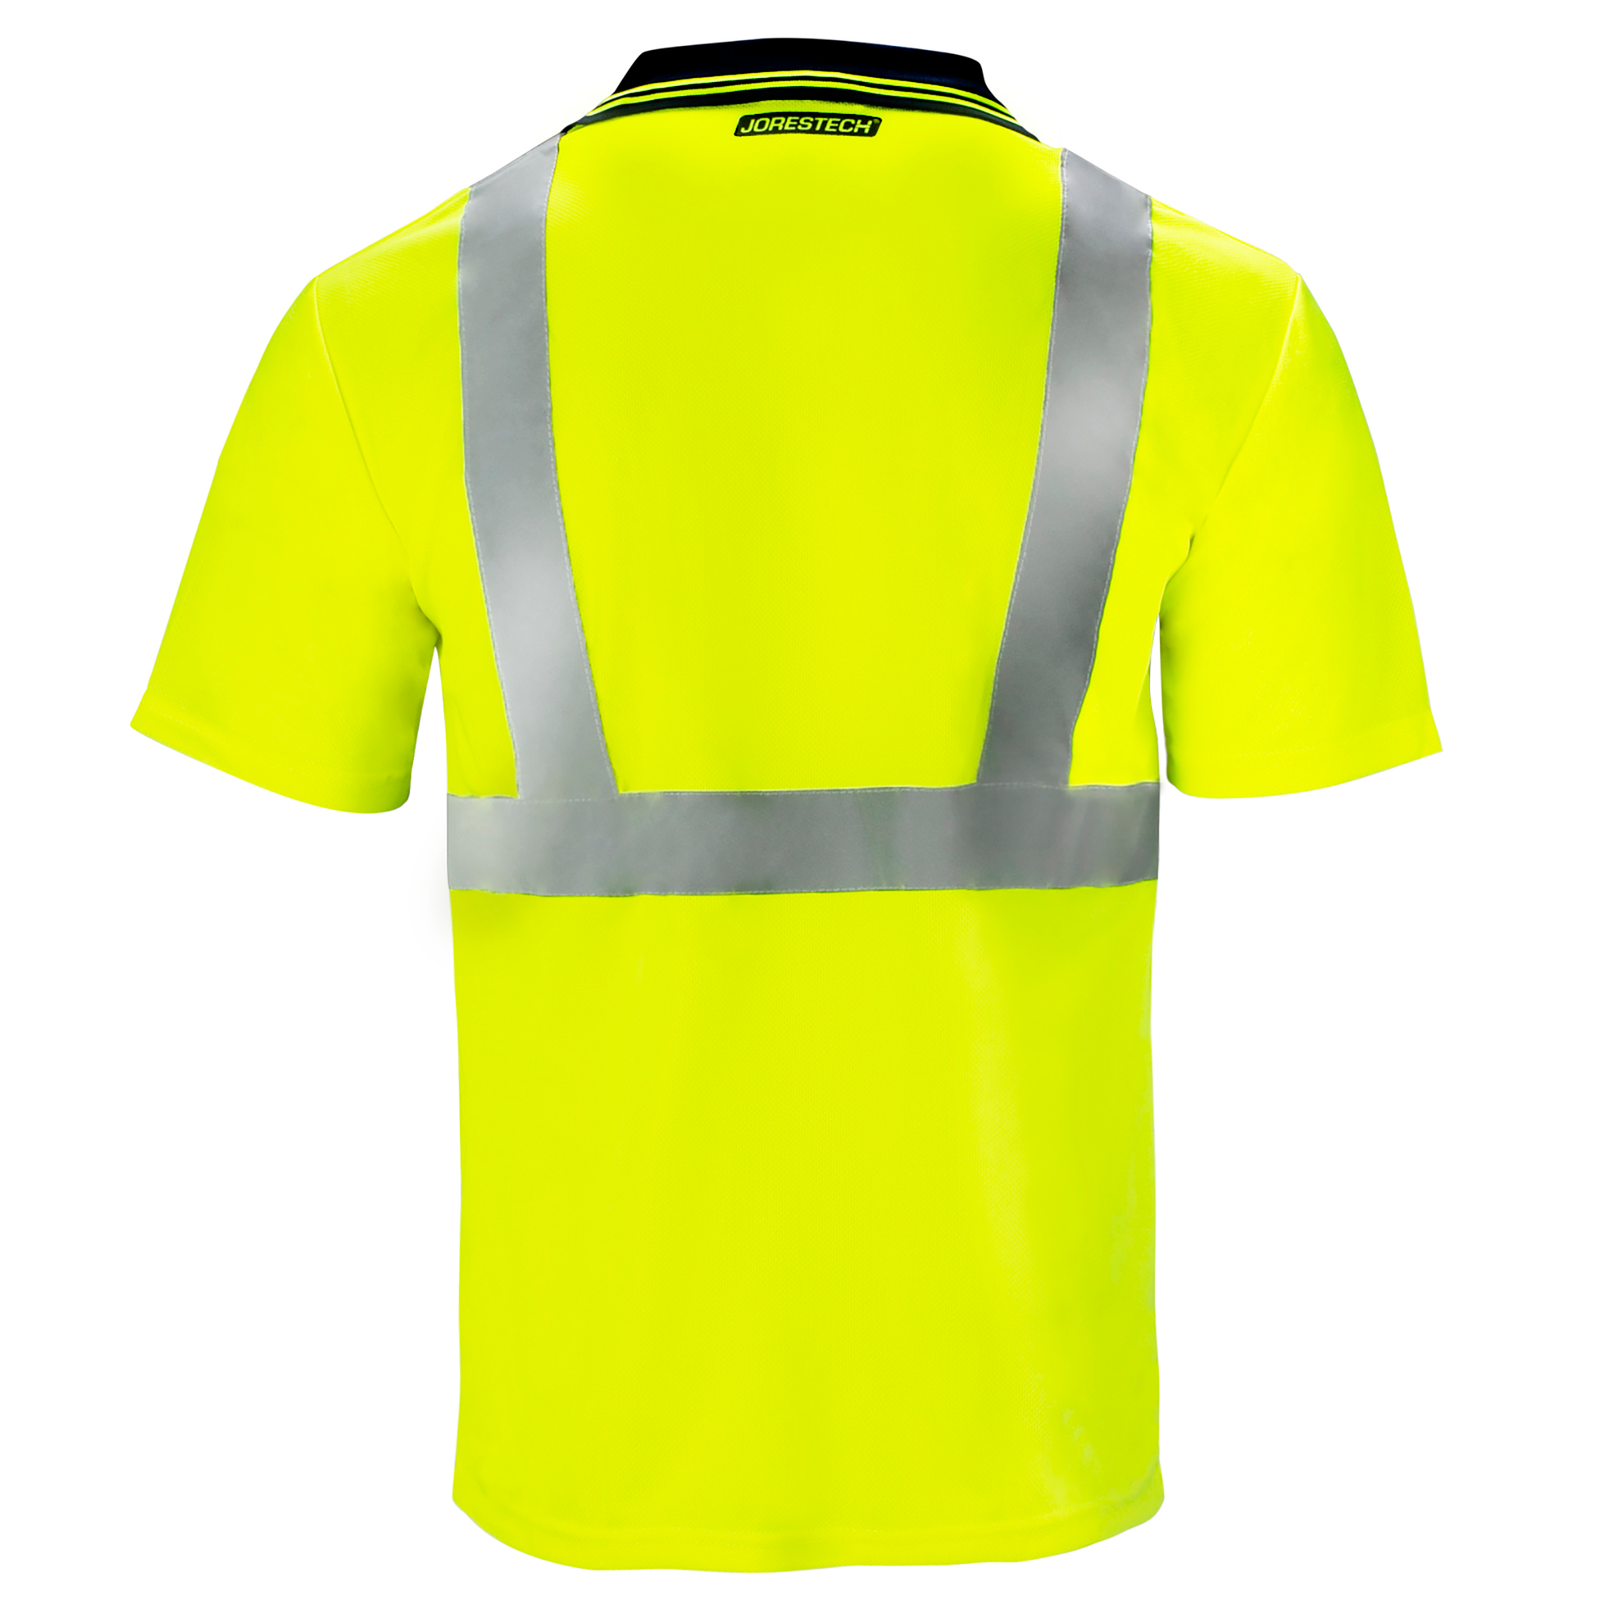 Back view of a yellow reflective safety polo shirt. Safety polo shirt is short sleeve